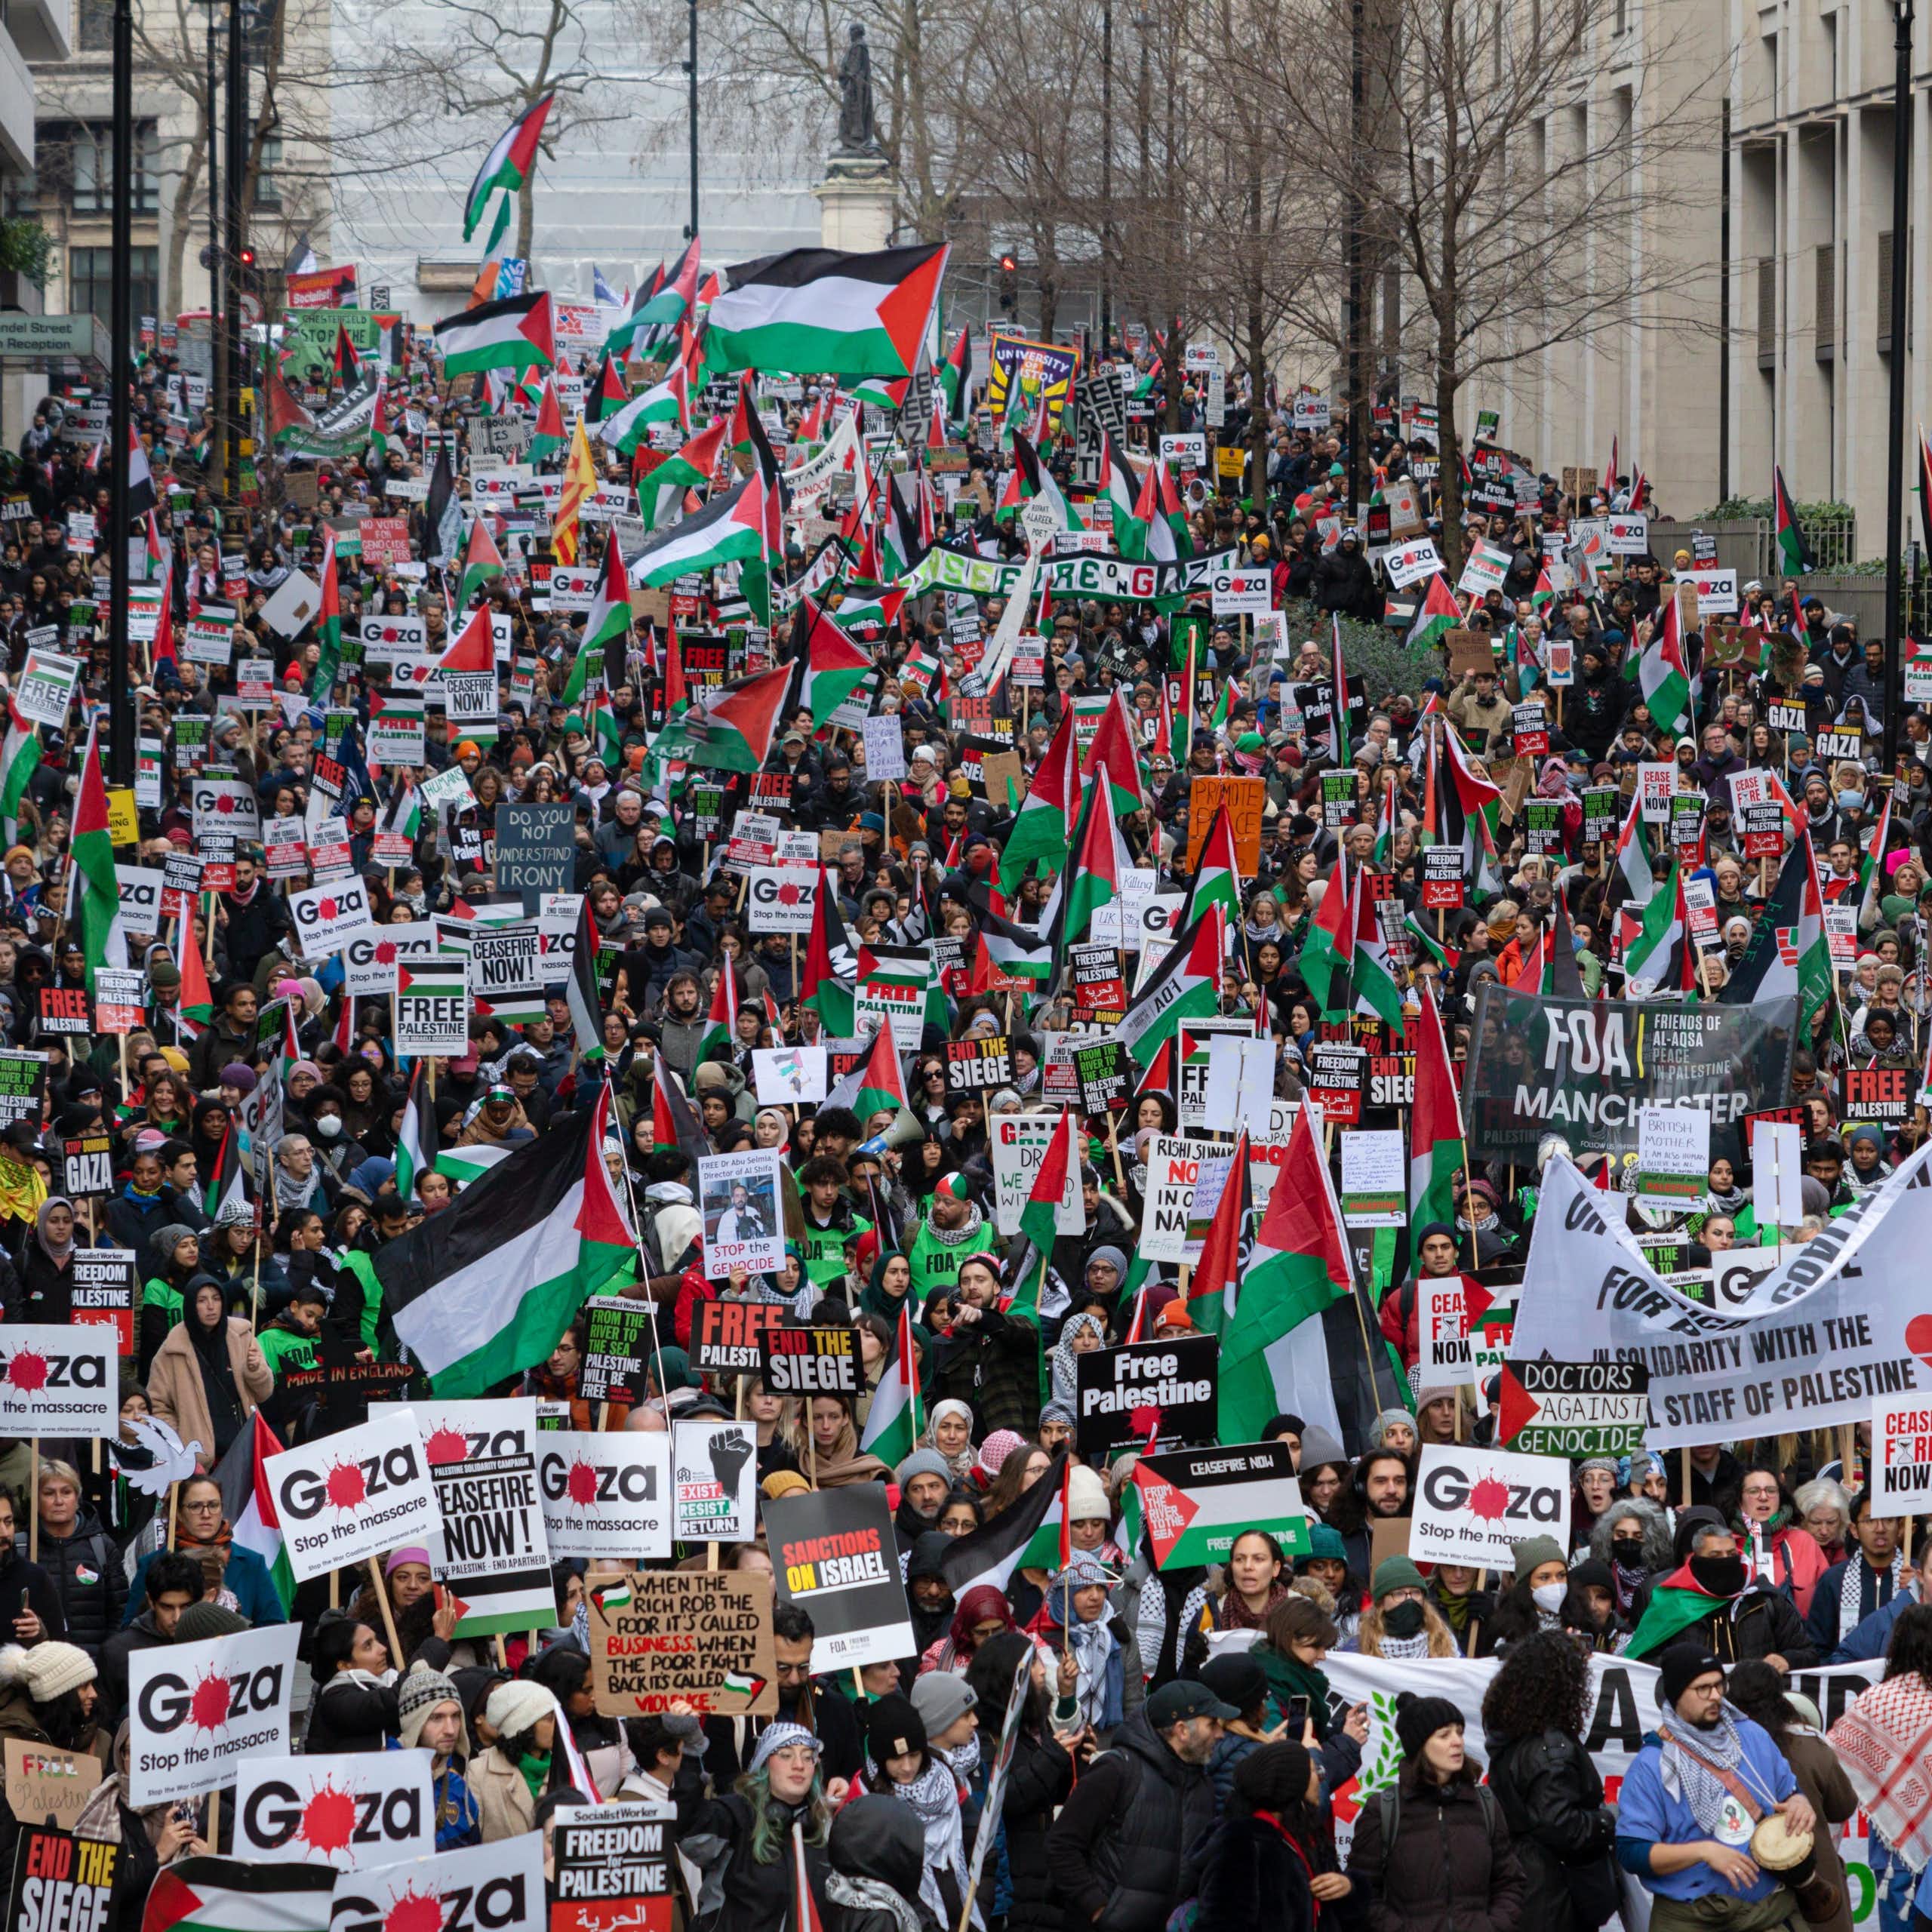 A large crowd of protesters carrying Palestinian flags fill a London street